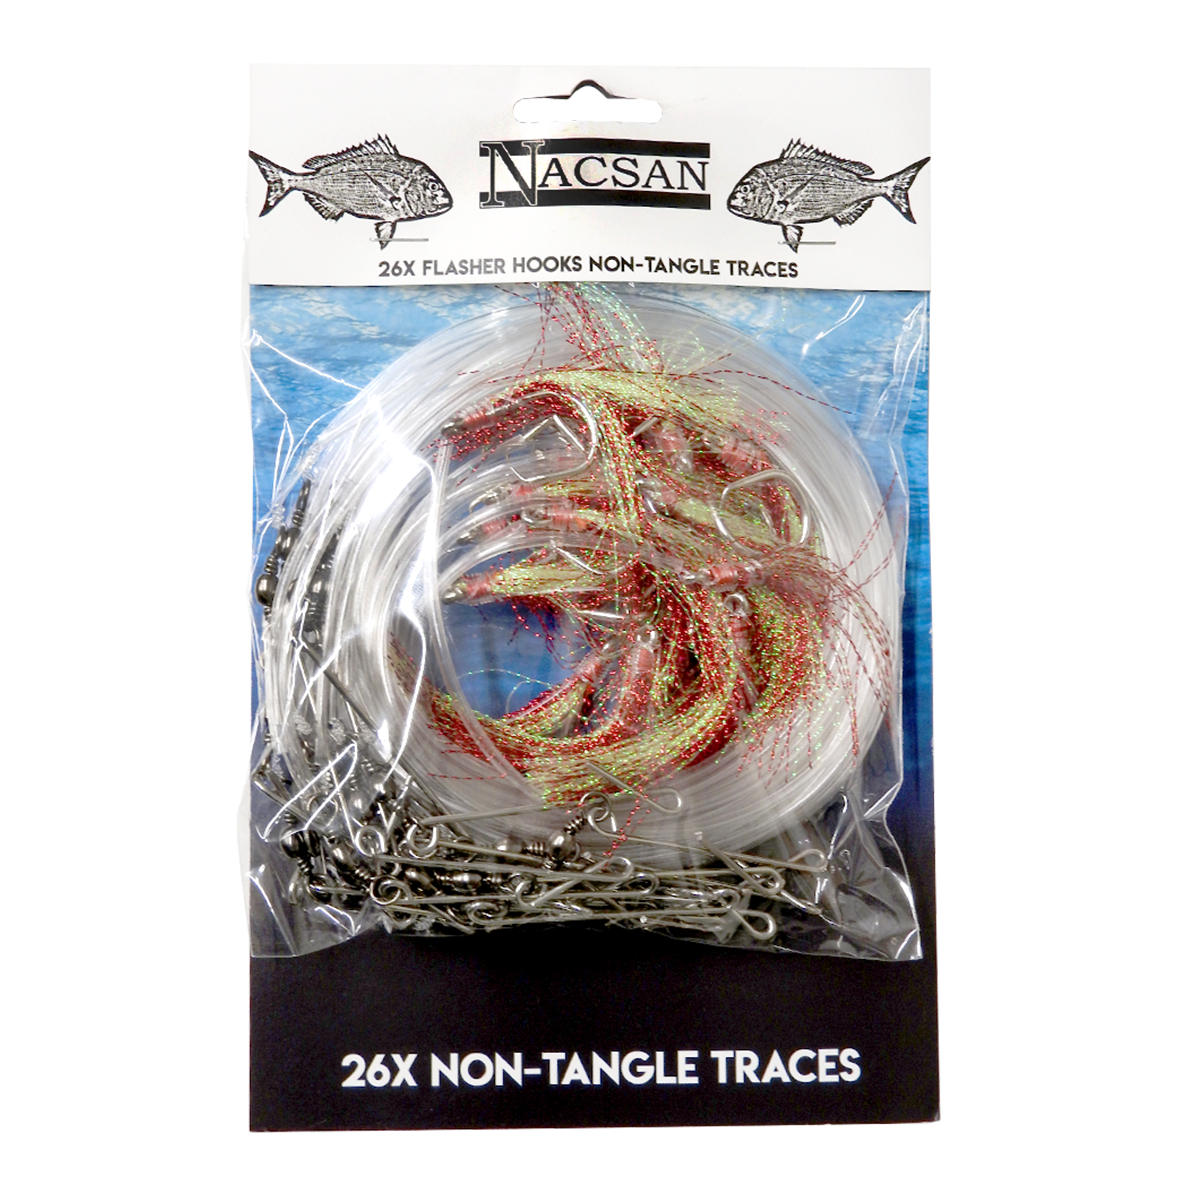 Tangle Free Longline Trace Set With Flasher Rig Hooks (26 Pack